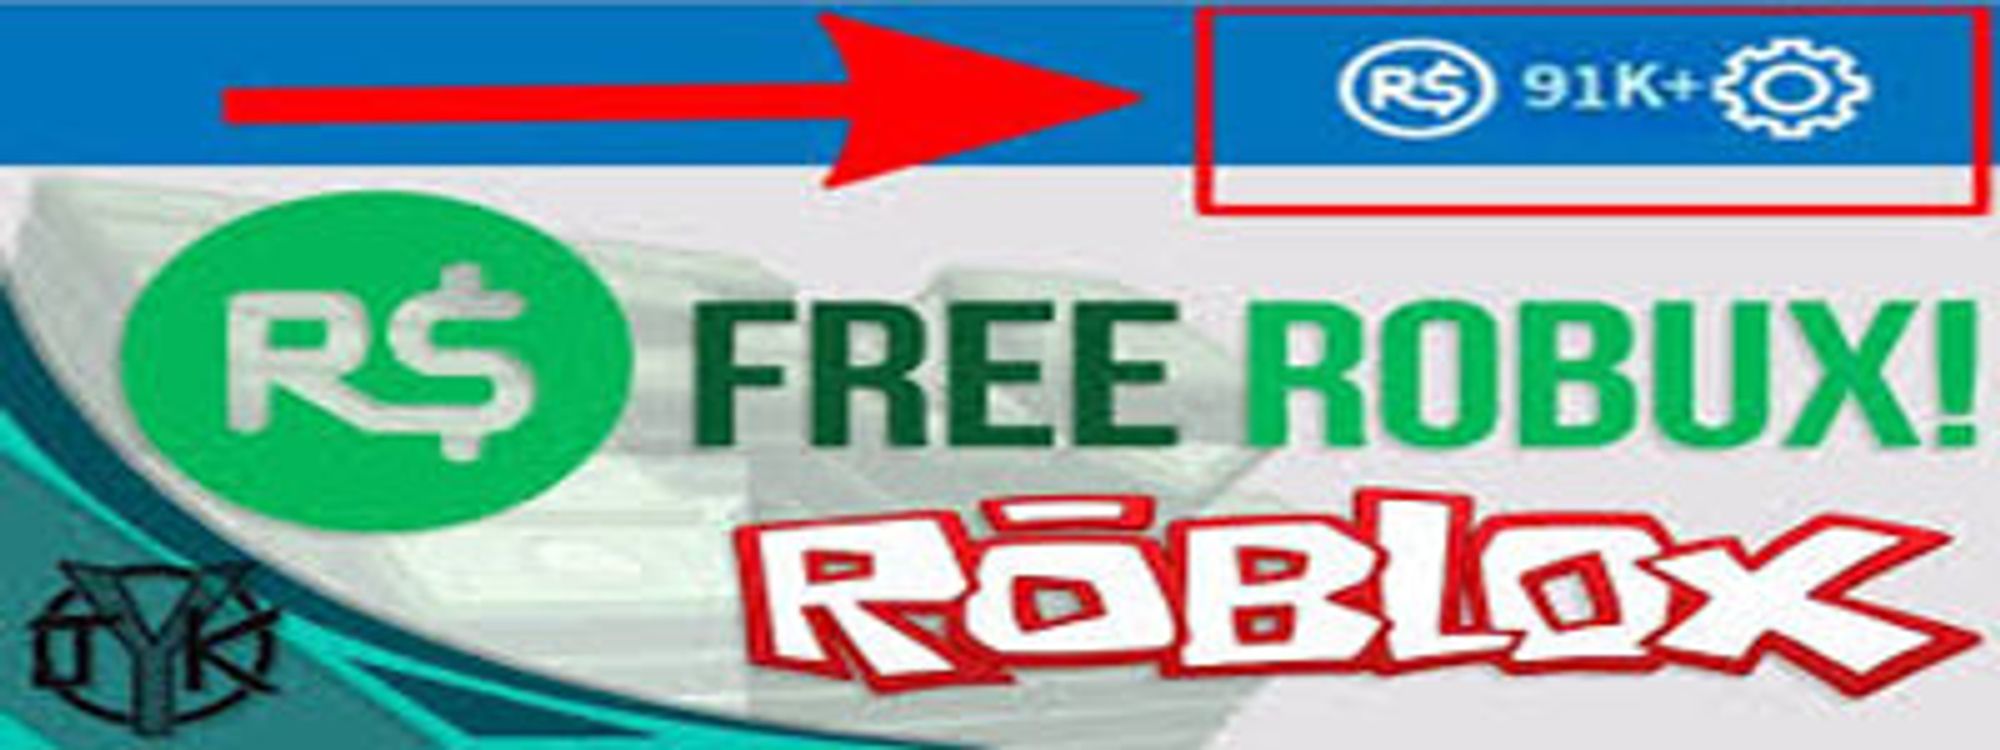 Roblox Robux Free Roblox Robux Codes With Skins Password Account 2020 - robux 2020 us 🤫